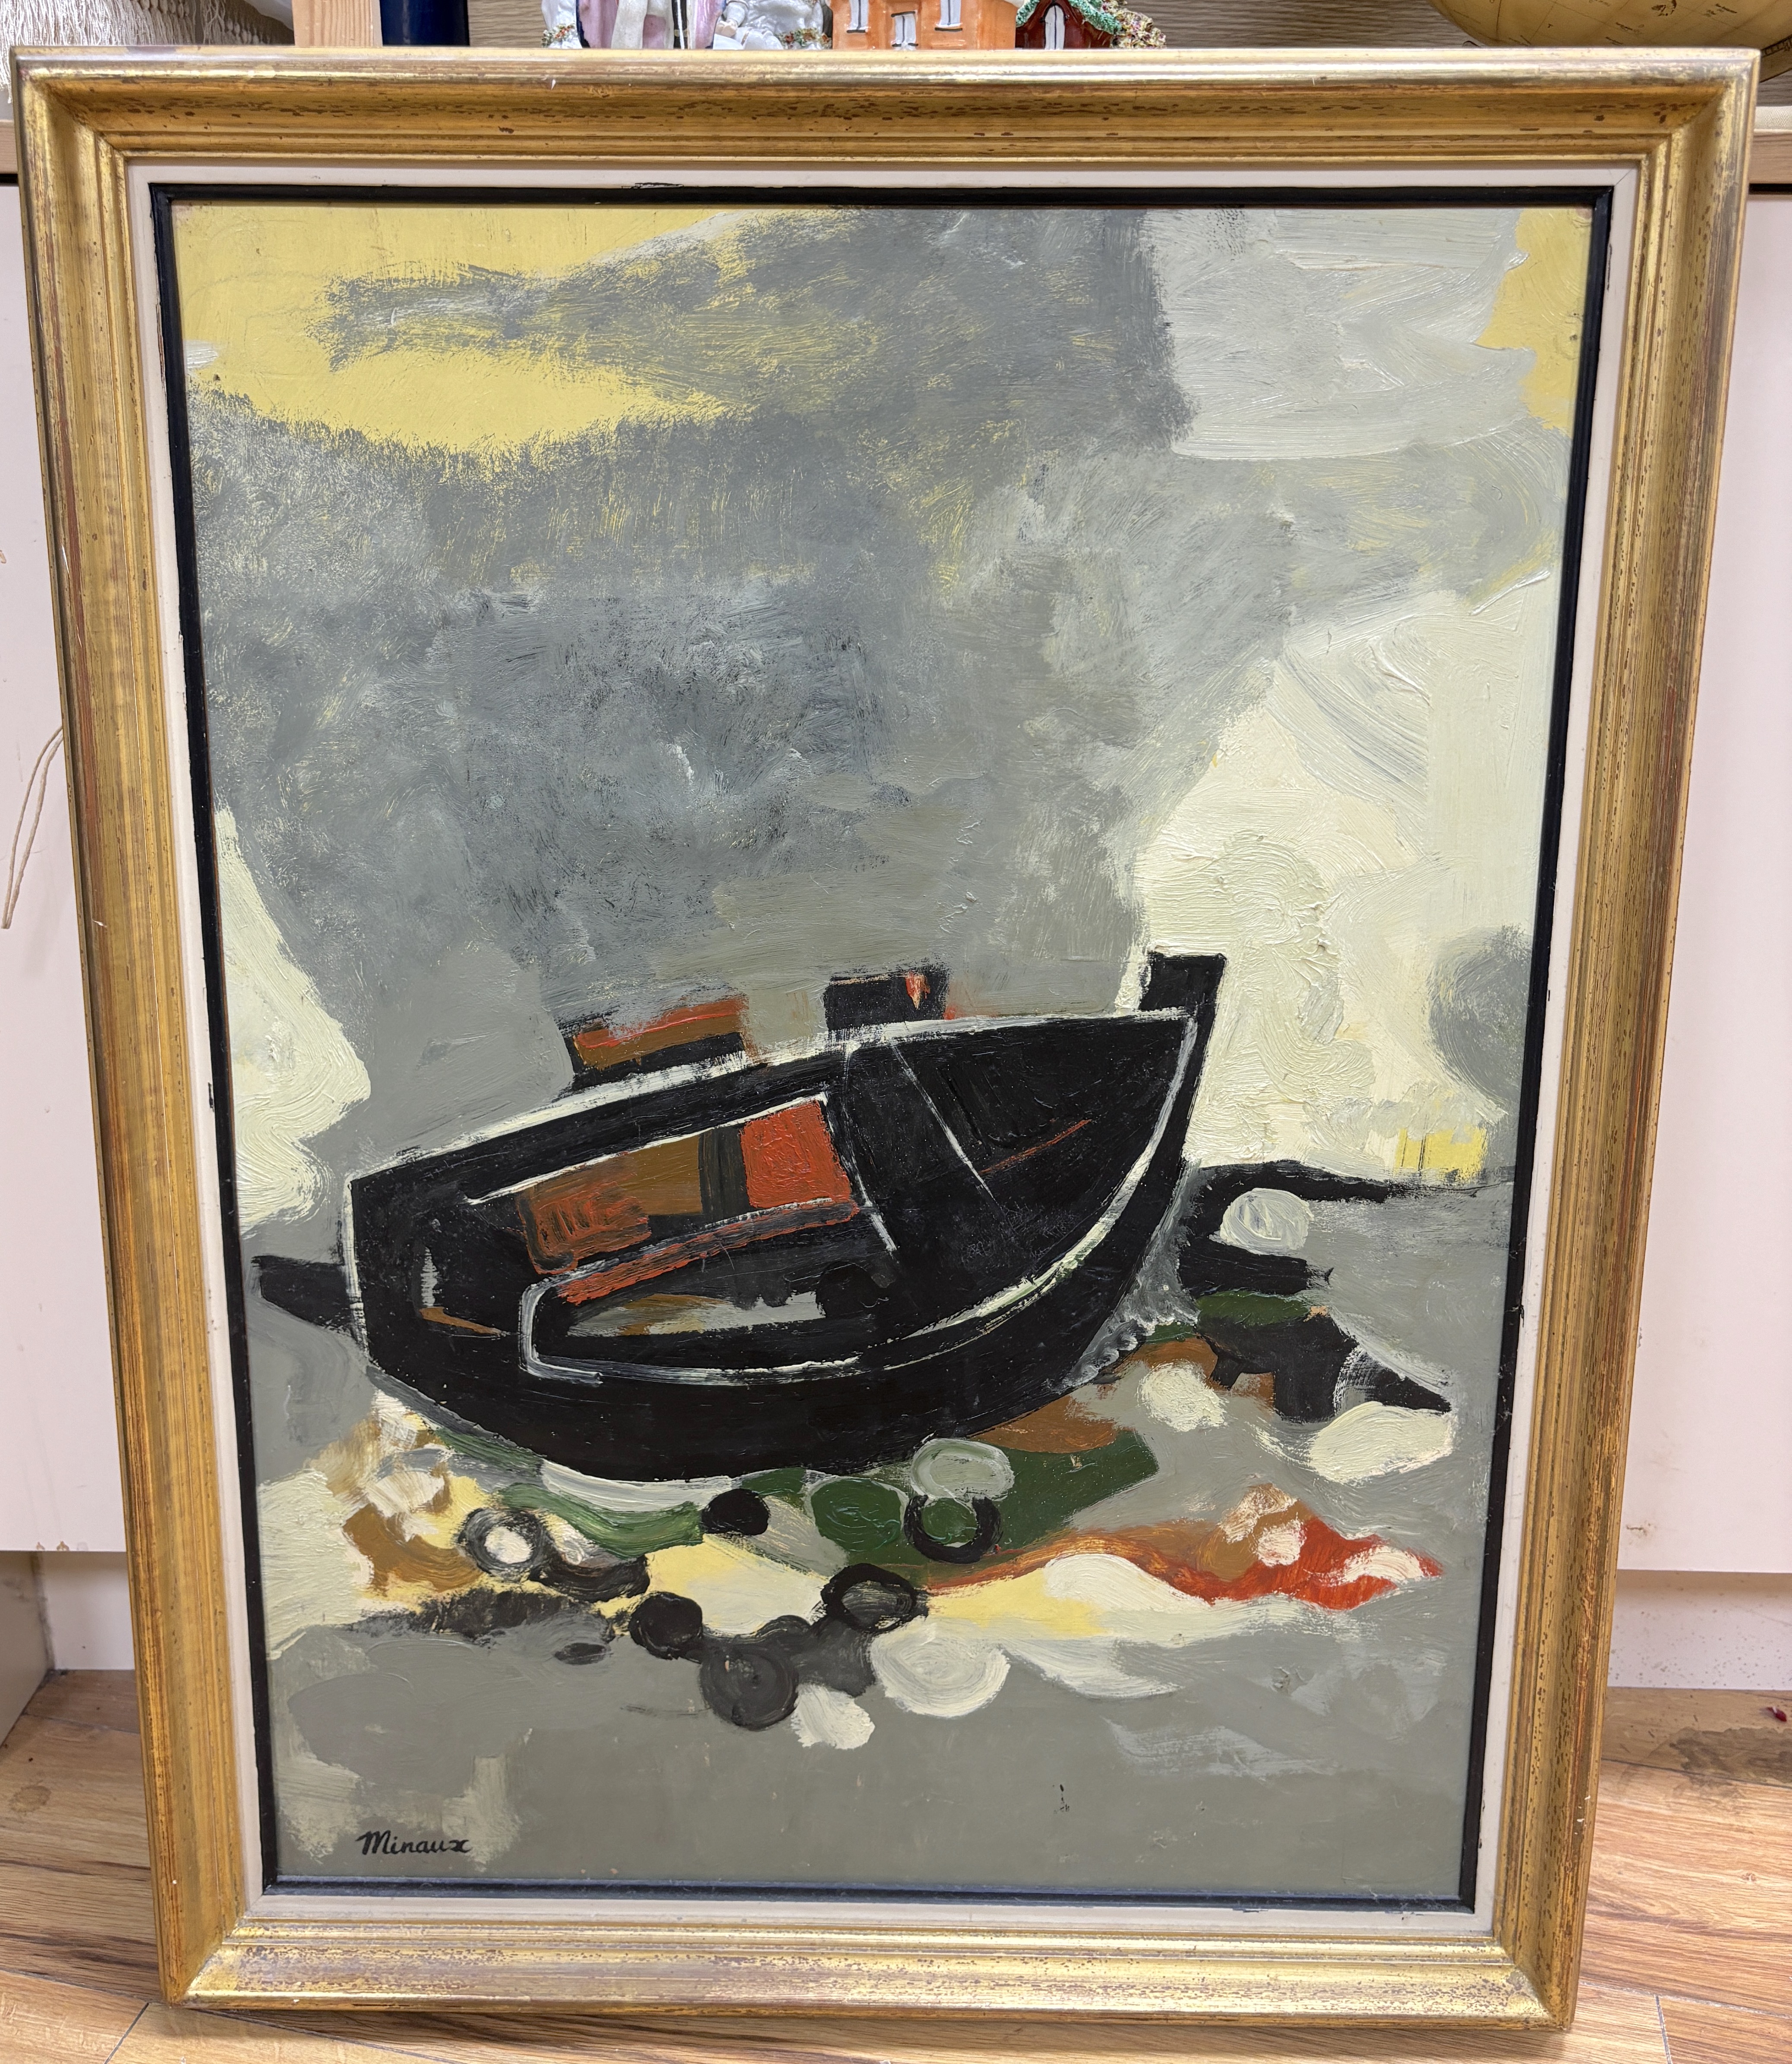 Andre Minaux (French, 1923-1986), oil on canvas, Beached fishing boat, signed, 75 x 55cm